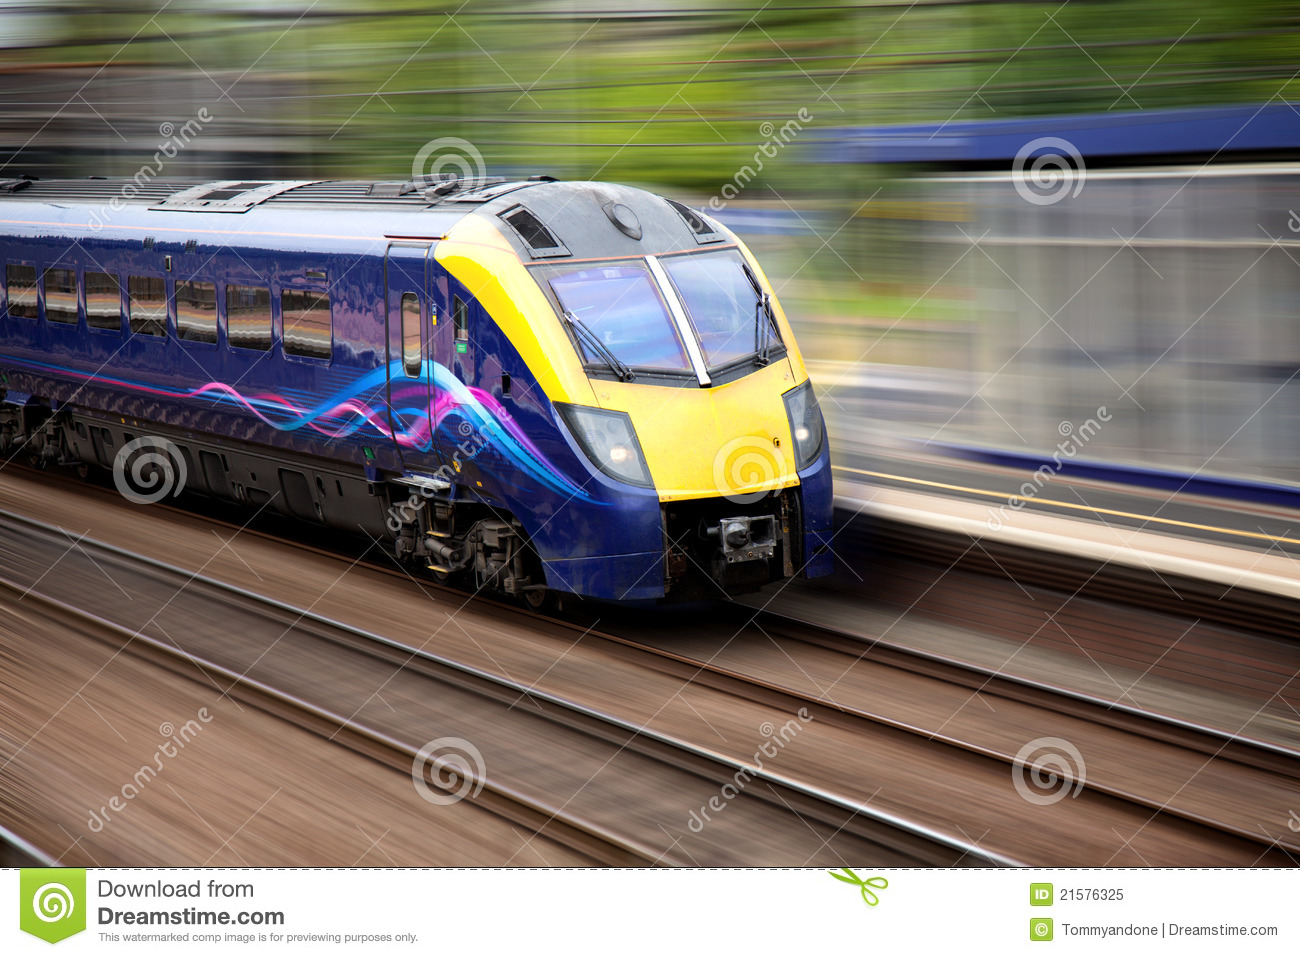 Fast Moving Train Royalty Free Stock Photo   Image  21576325